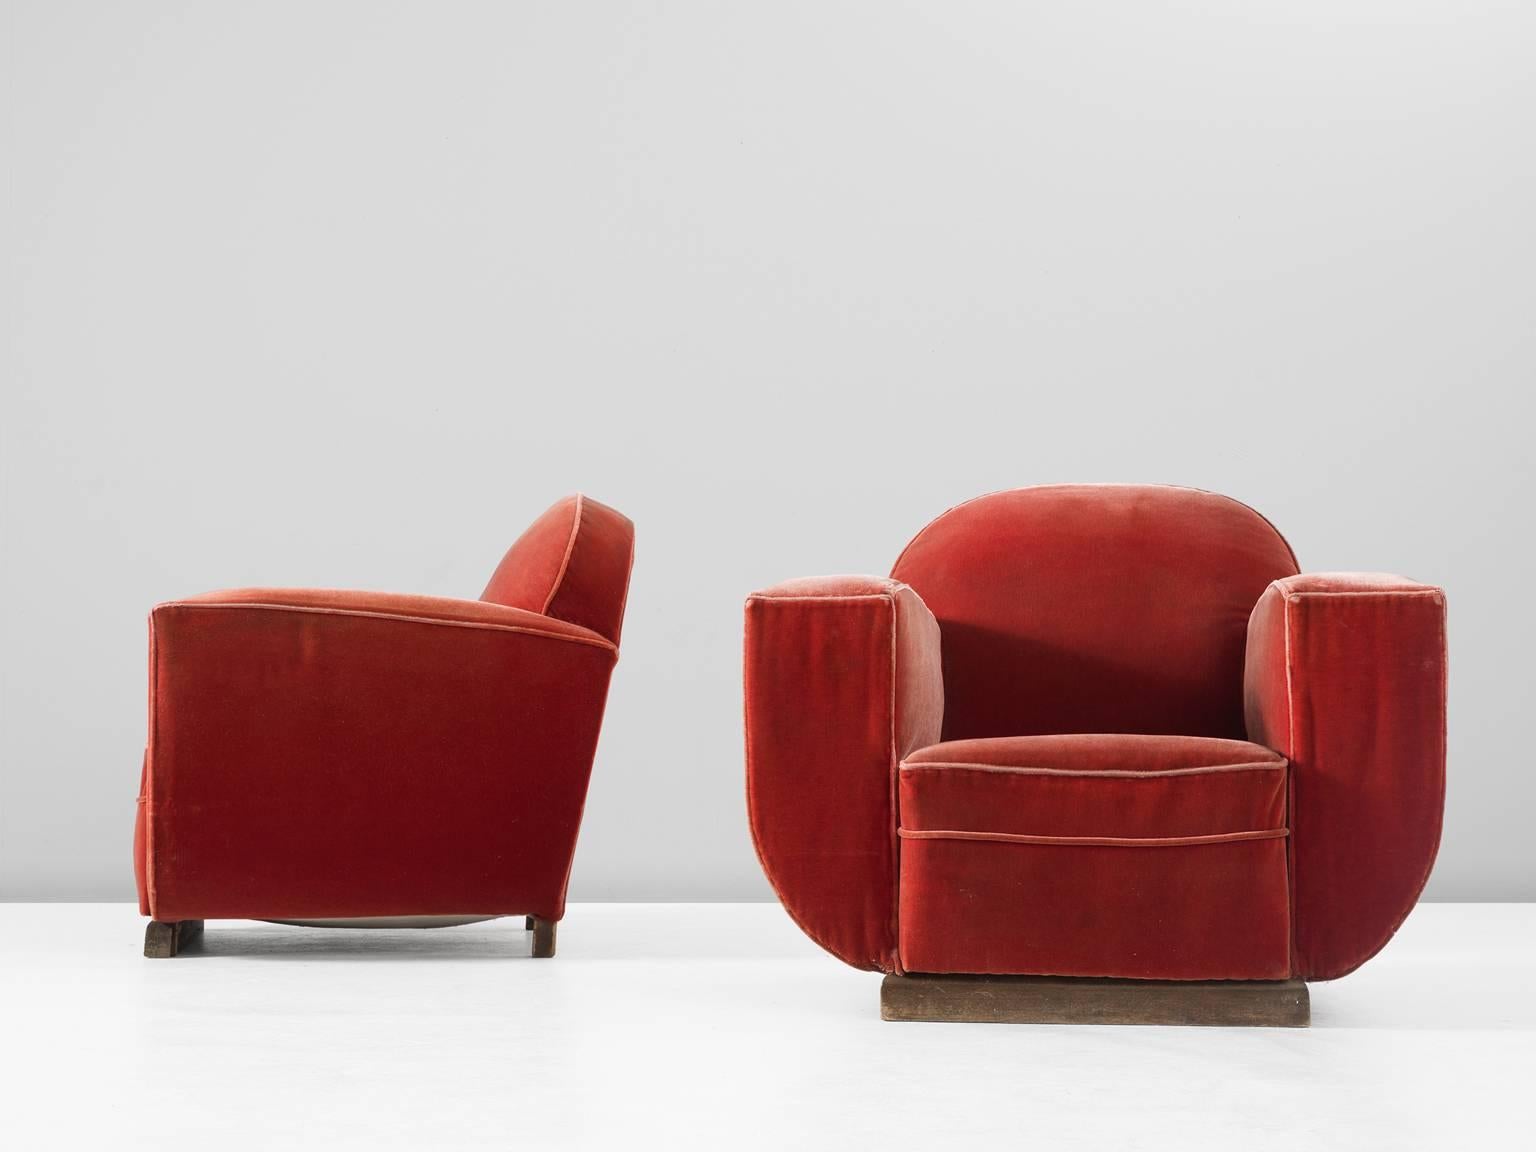 Pair of lounge chairs, in fabric and wood, France, 1940s.

Set of two late Art Deco club chairs with red-orange mohair upholstery. Very voluminous chairs with a nice variation in straight and round lines. Highly comfortable chairs. The contrasting